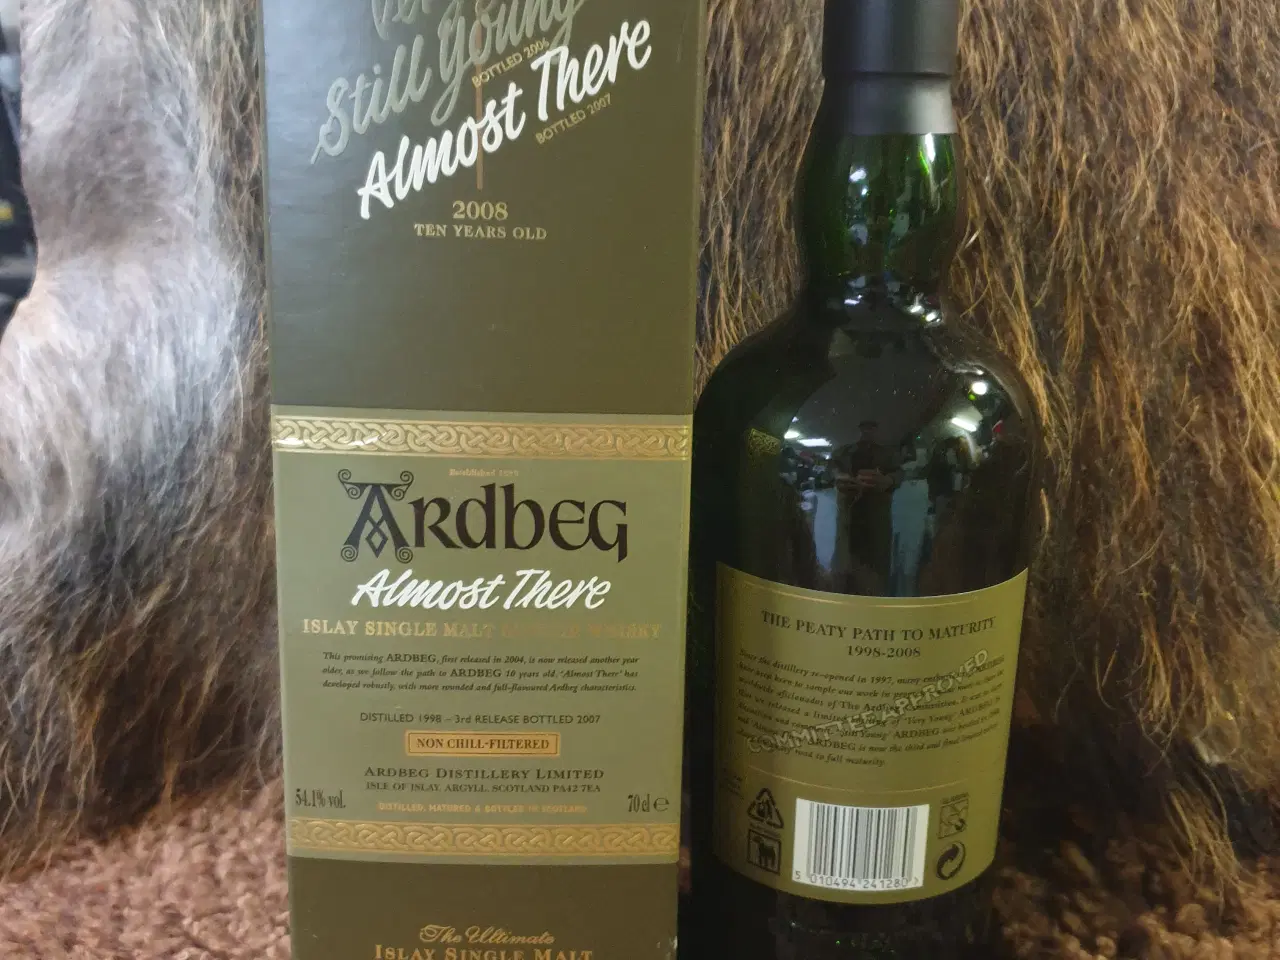 Billede 2 - Ardbeg - Almost There